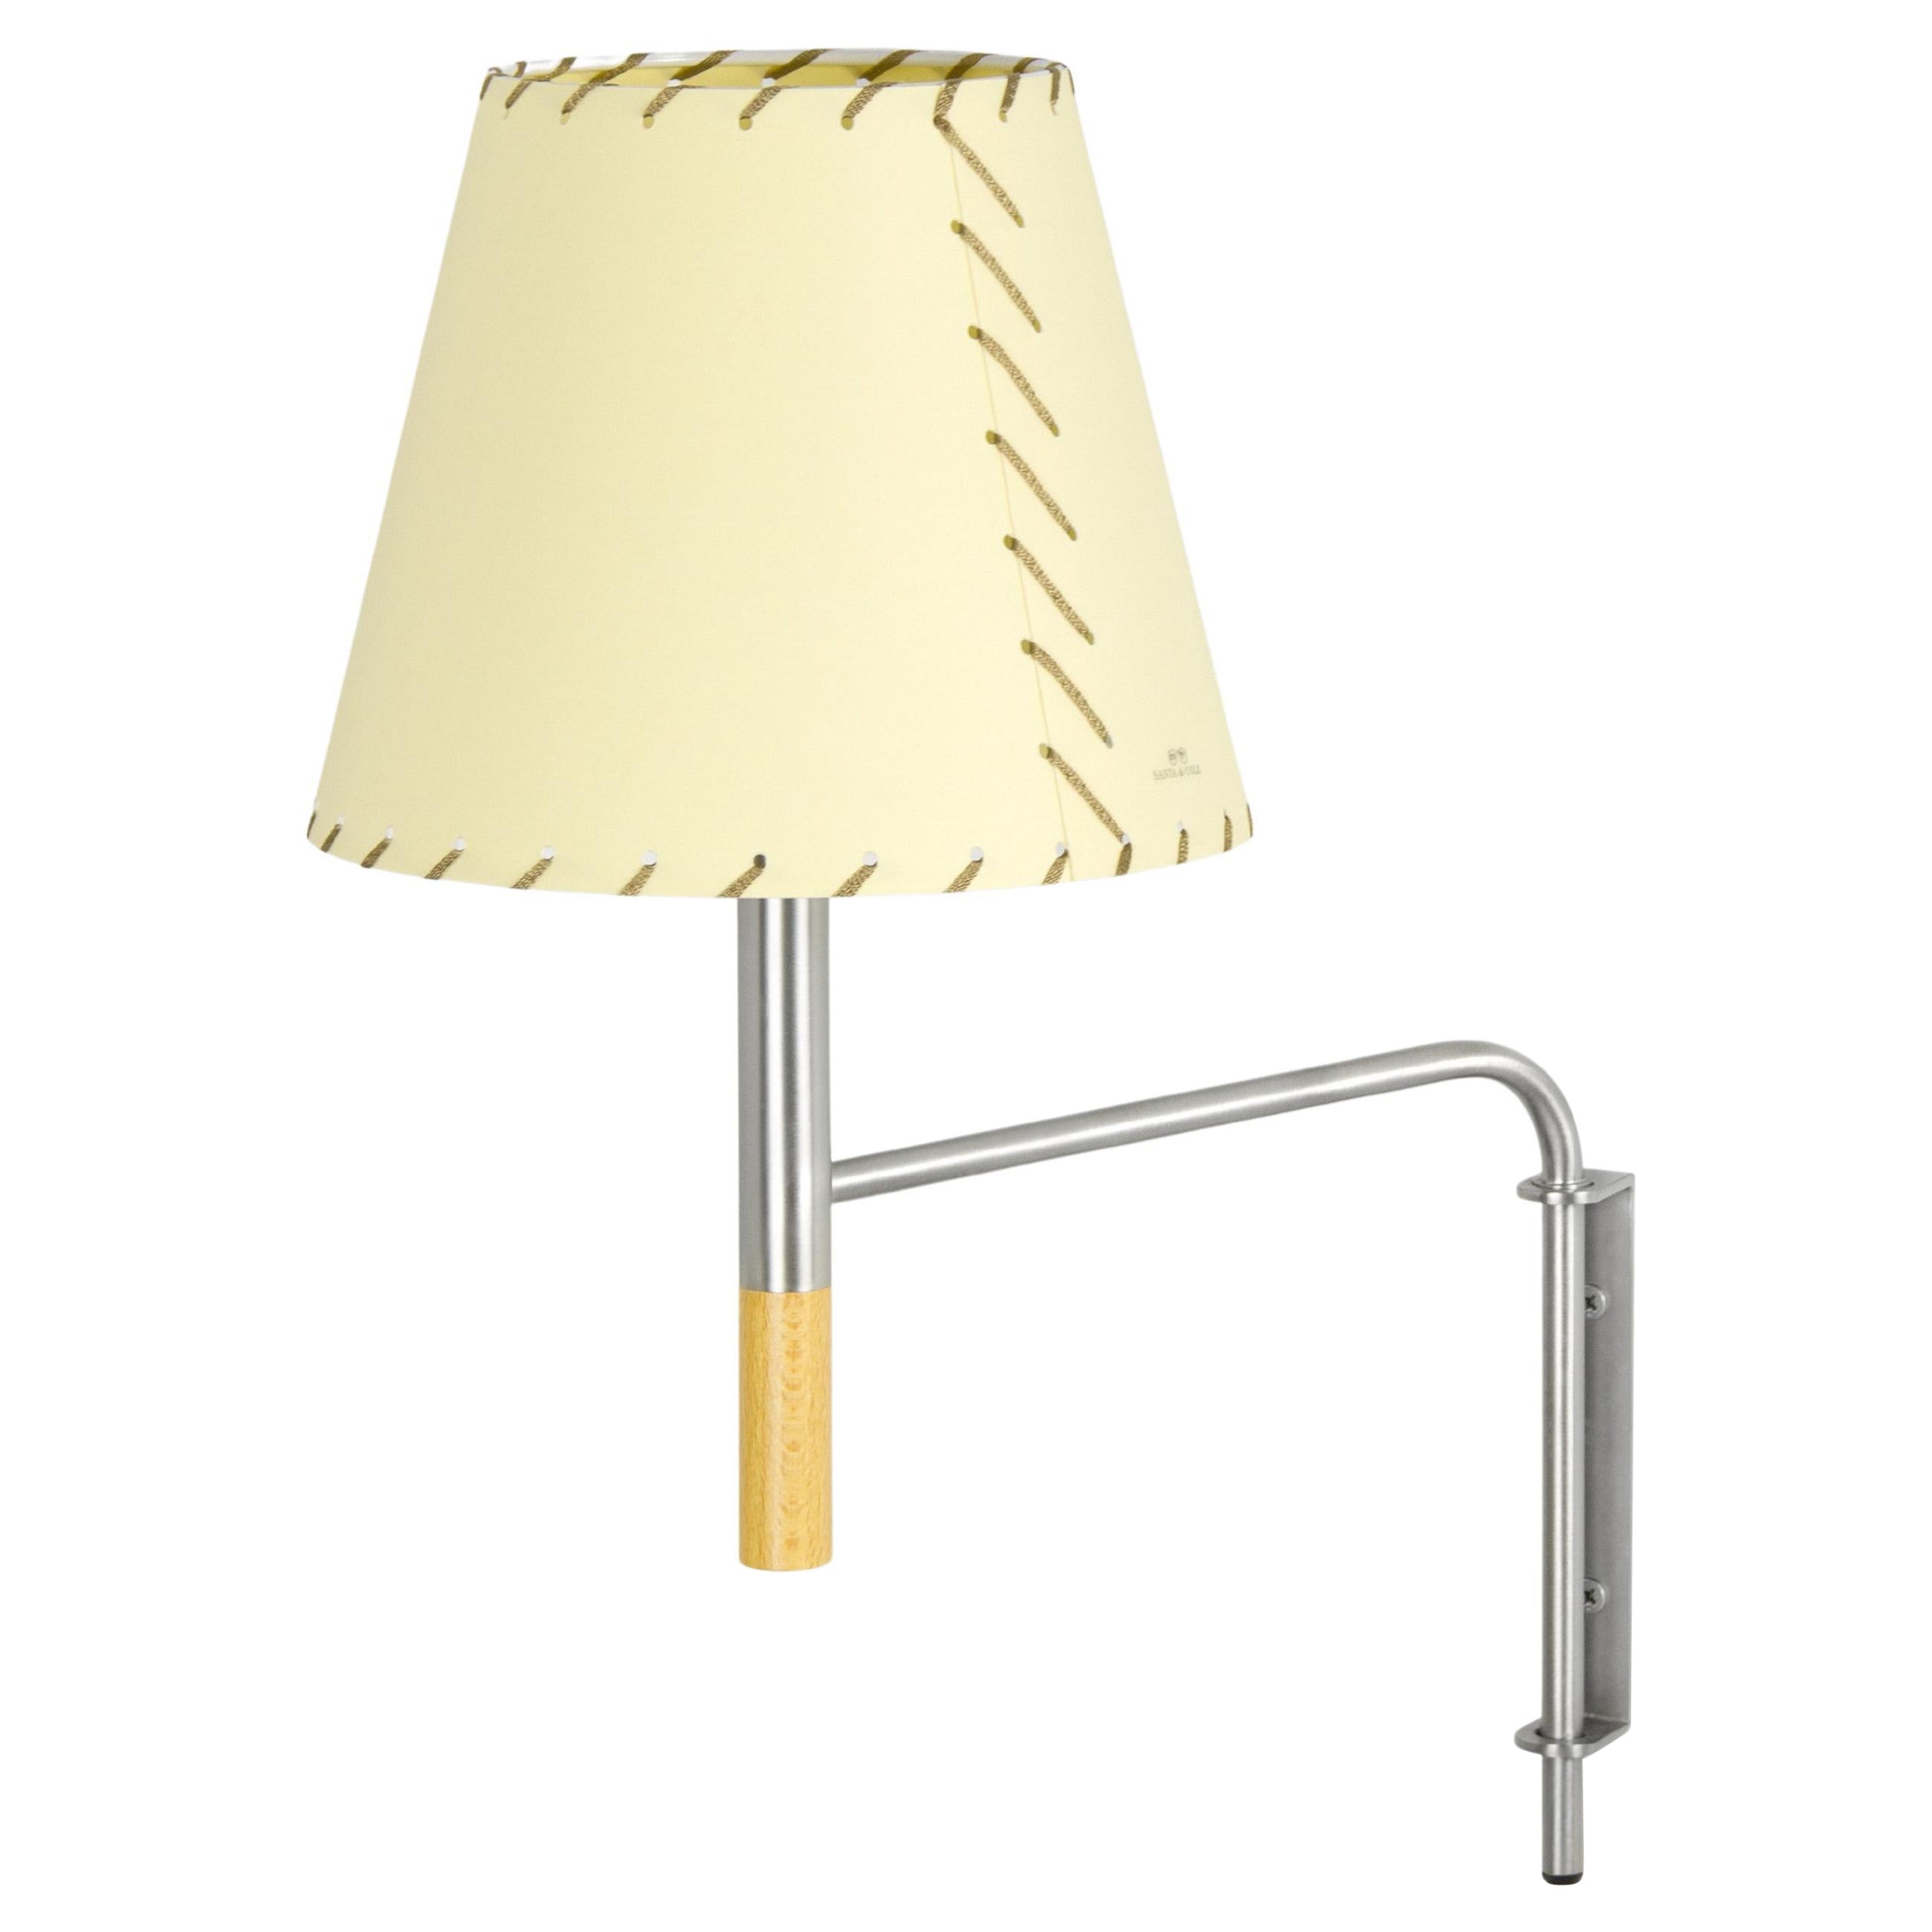 Beige BC1 Wall Lamp by Santa & Cole